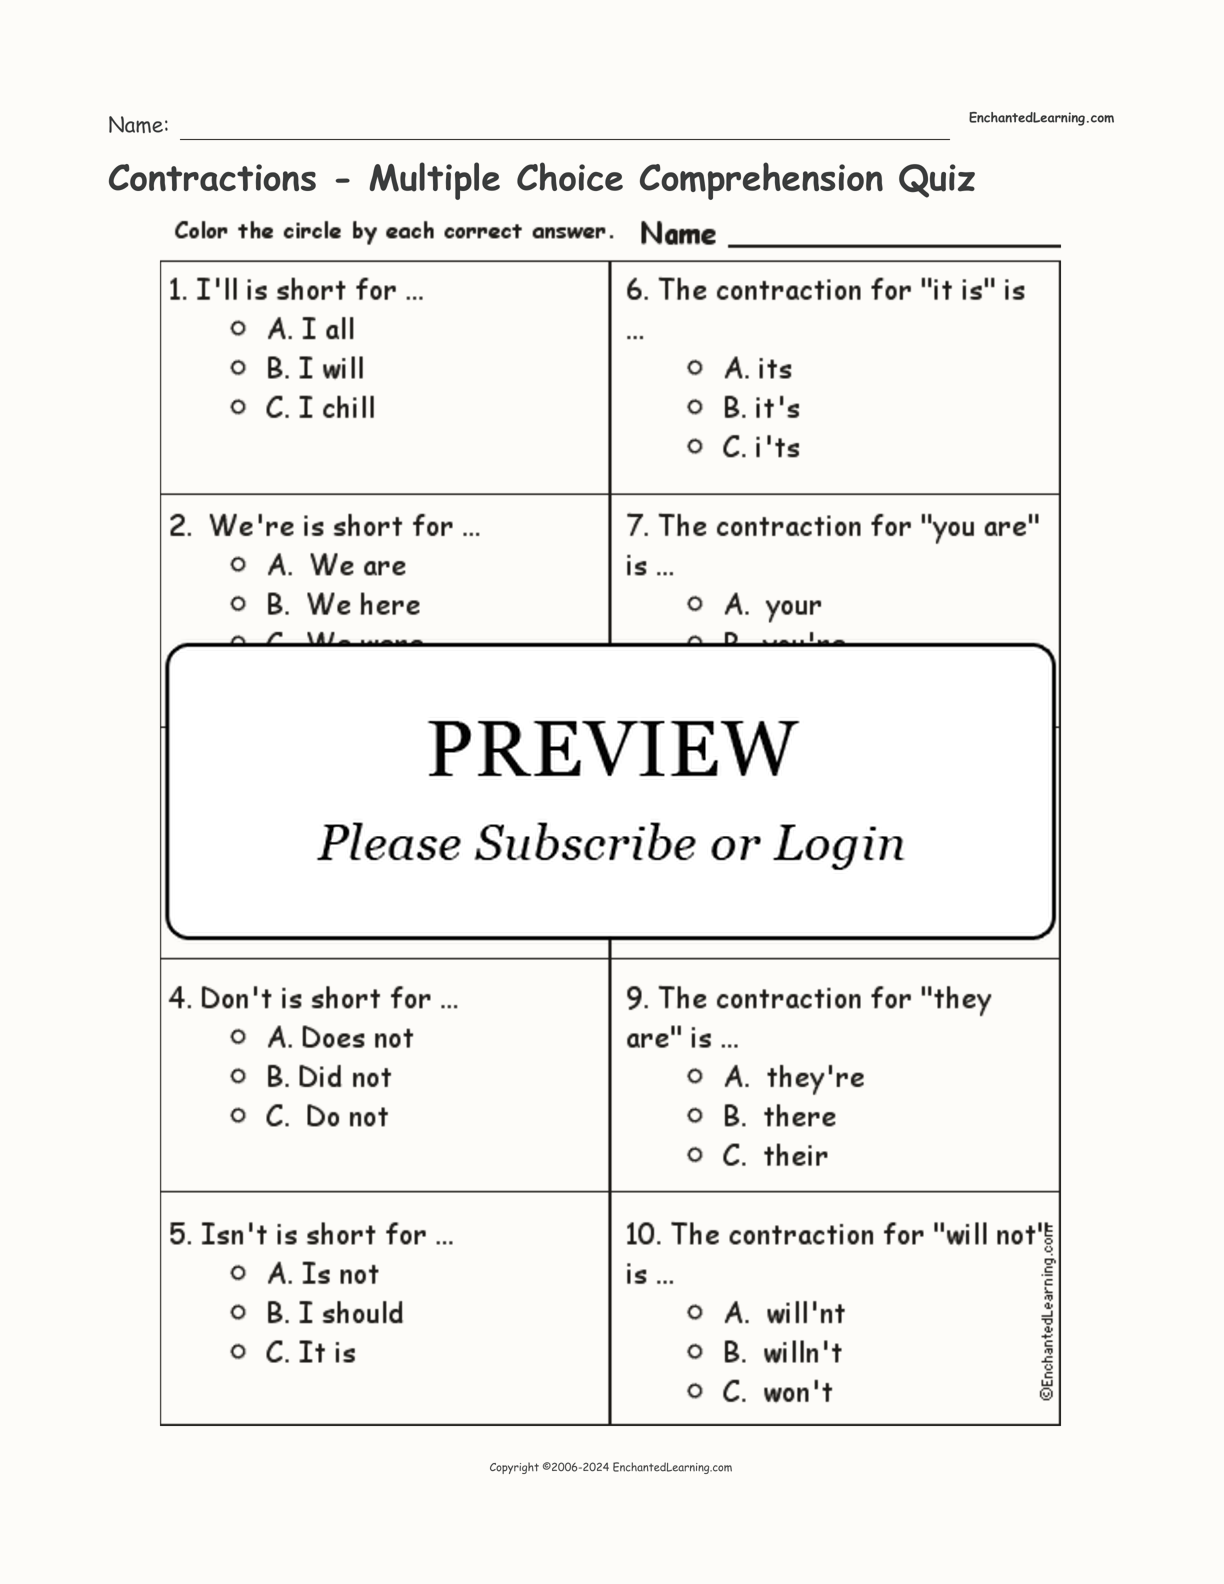 Contractions - Multiple Choice Comprehension Quiz interactive worksheet page 1